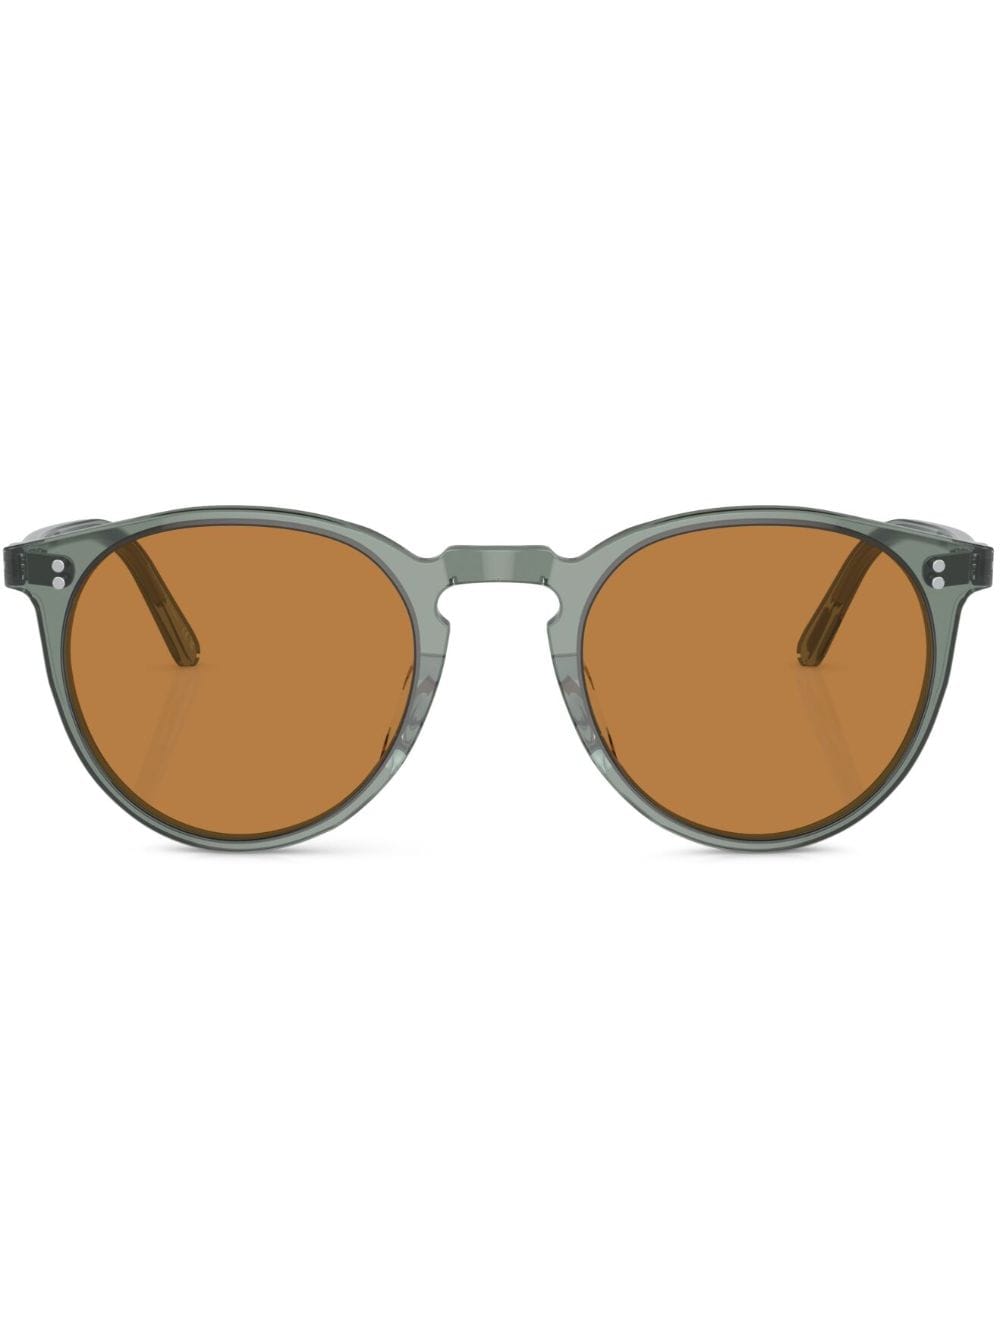 Oliver Peoples O'Malley Sun pantos-frame sunglasses - Green von Oliver Peoples